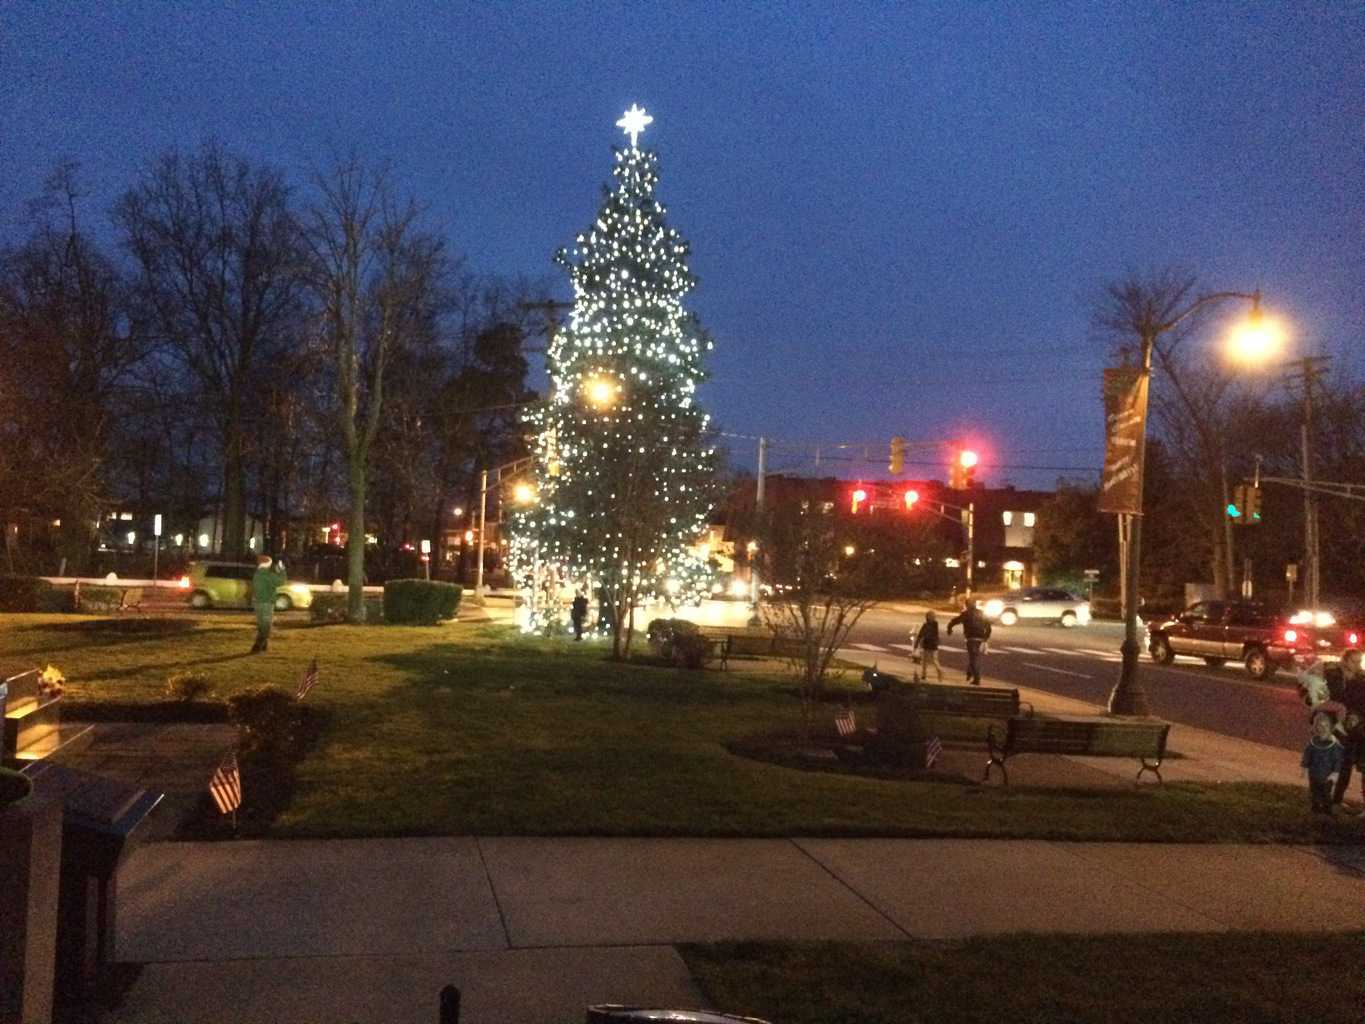 Ocean County Christmas Tree Lit For All Residents | Jersey Shore Online